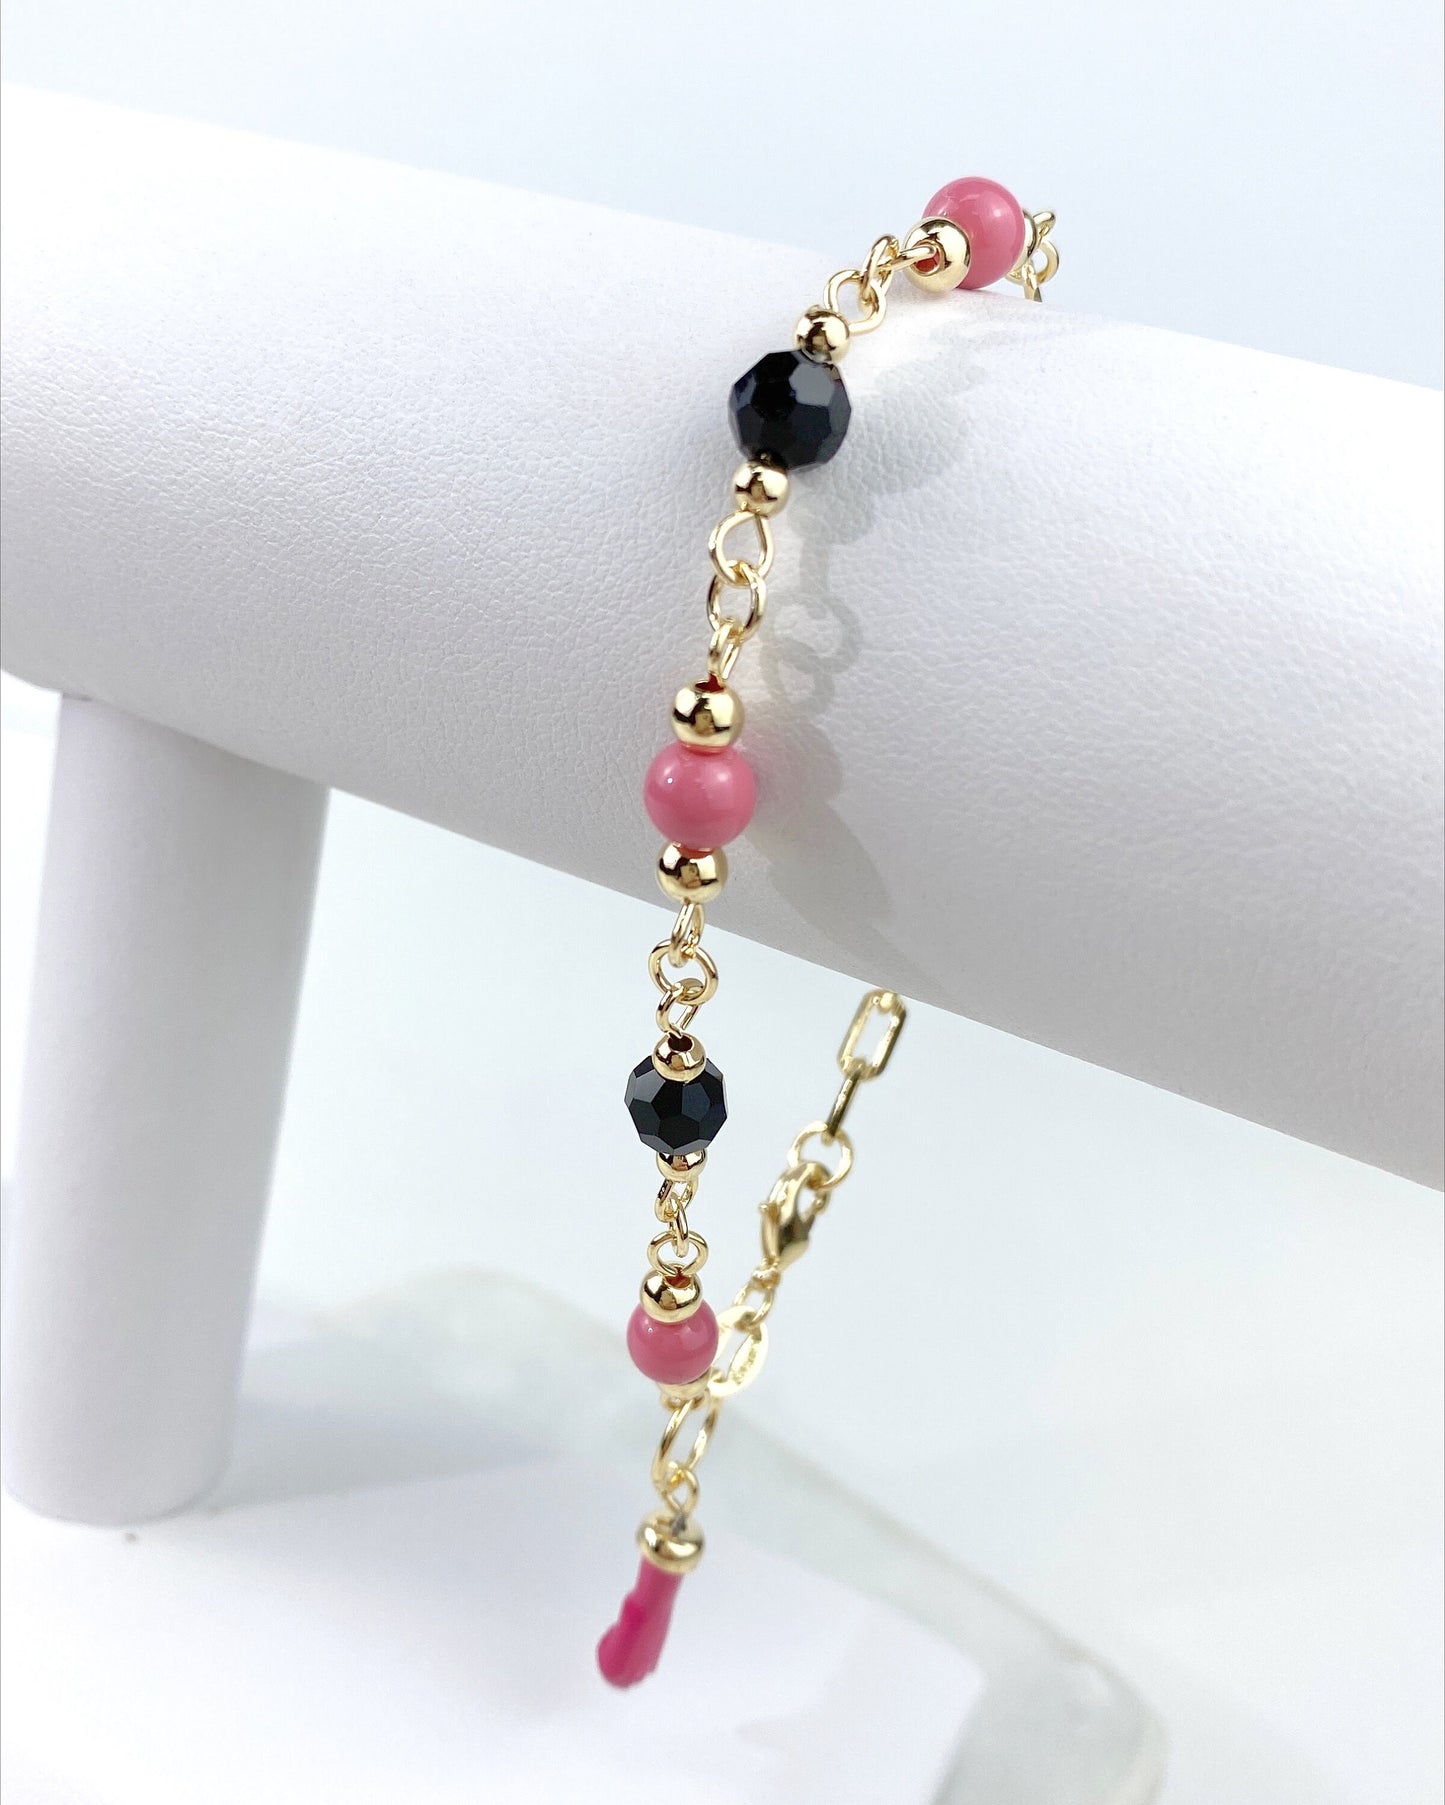 18k Gold Filled Paper Clip Link Pink Beads, Simulated Azabache, Figa Hand Charm Bracelet, Luck Protection, Wholesale Jewelry Supplies